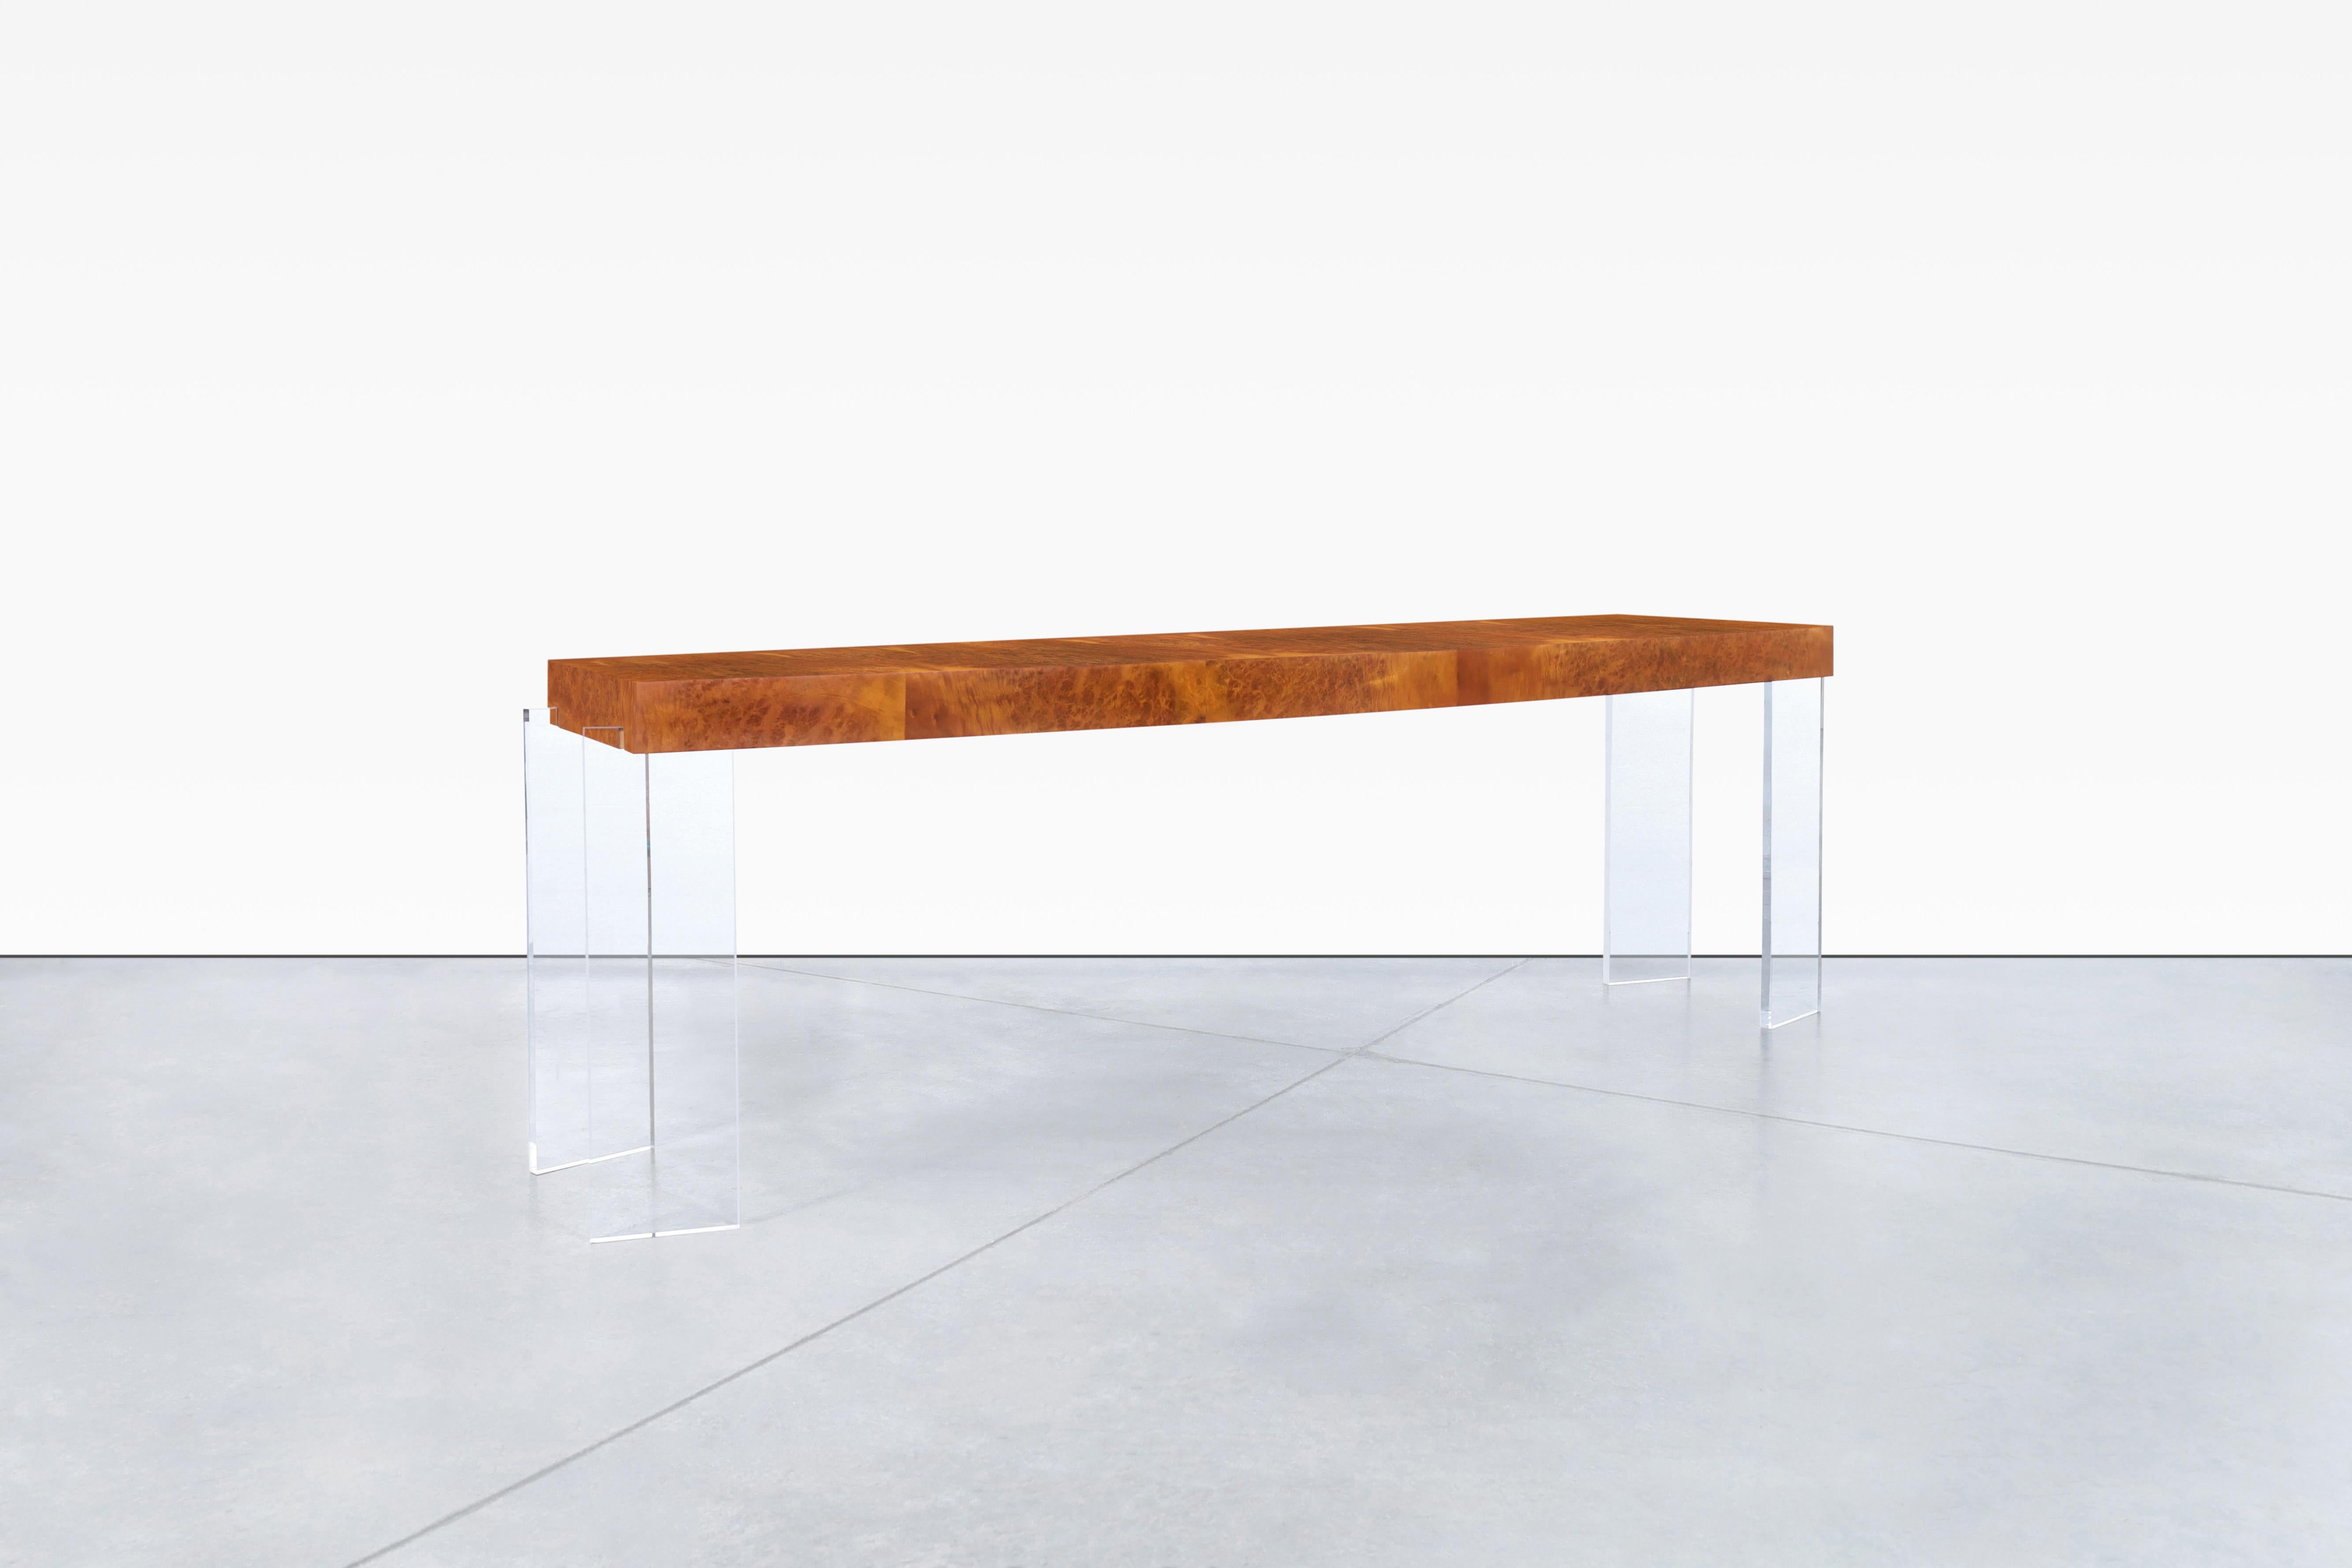 This stunning vintage console table is a true work of art. Crafted from beautifully grained burl wood and featuring sleek angled lucite legs, it exudes a sense of understated elegance. Measuring 8ft long, this piece is generously sized and offers